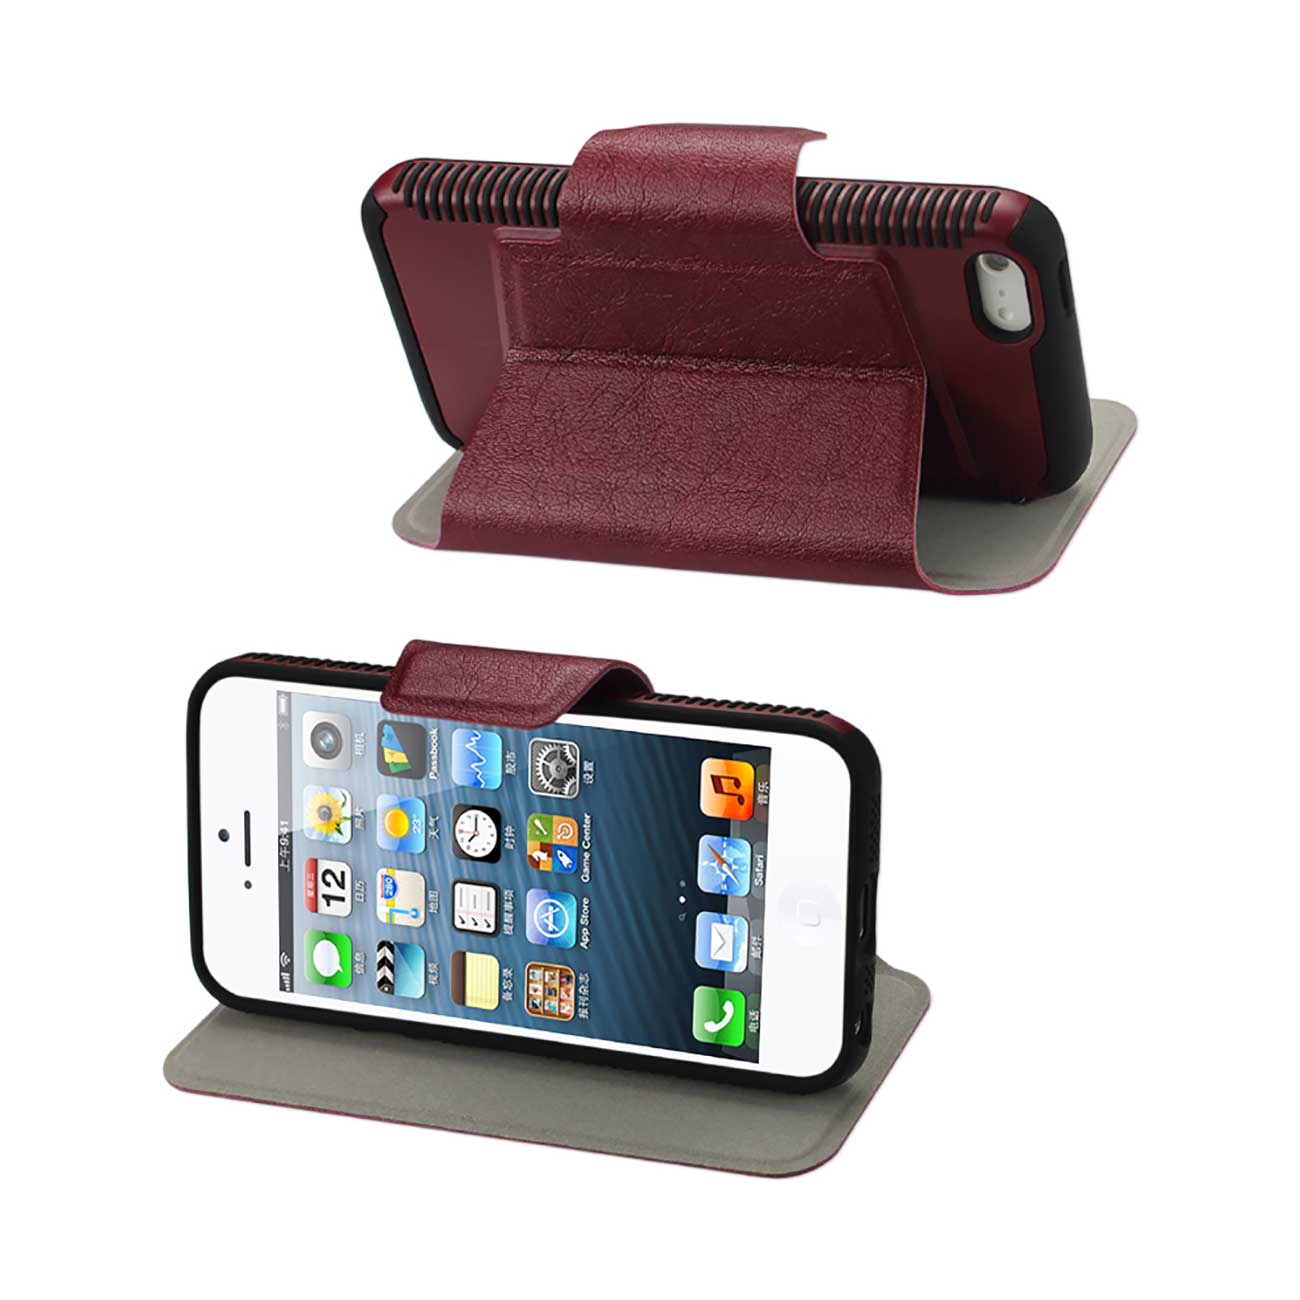 IPHONE 5/5S/SE FLIP CASE WITH KICKSTAND DOUBLE PROTECTION IN BLACK RED